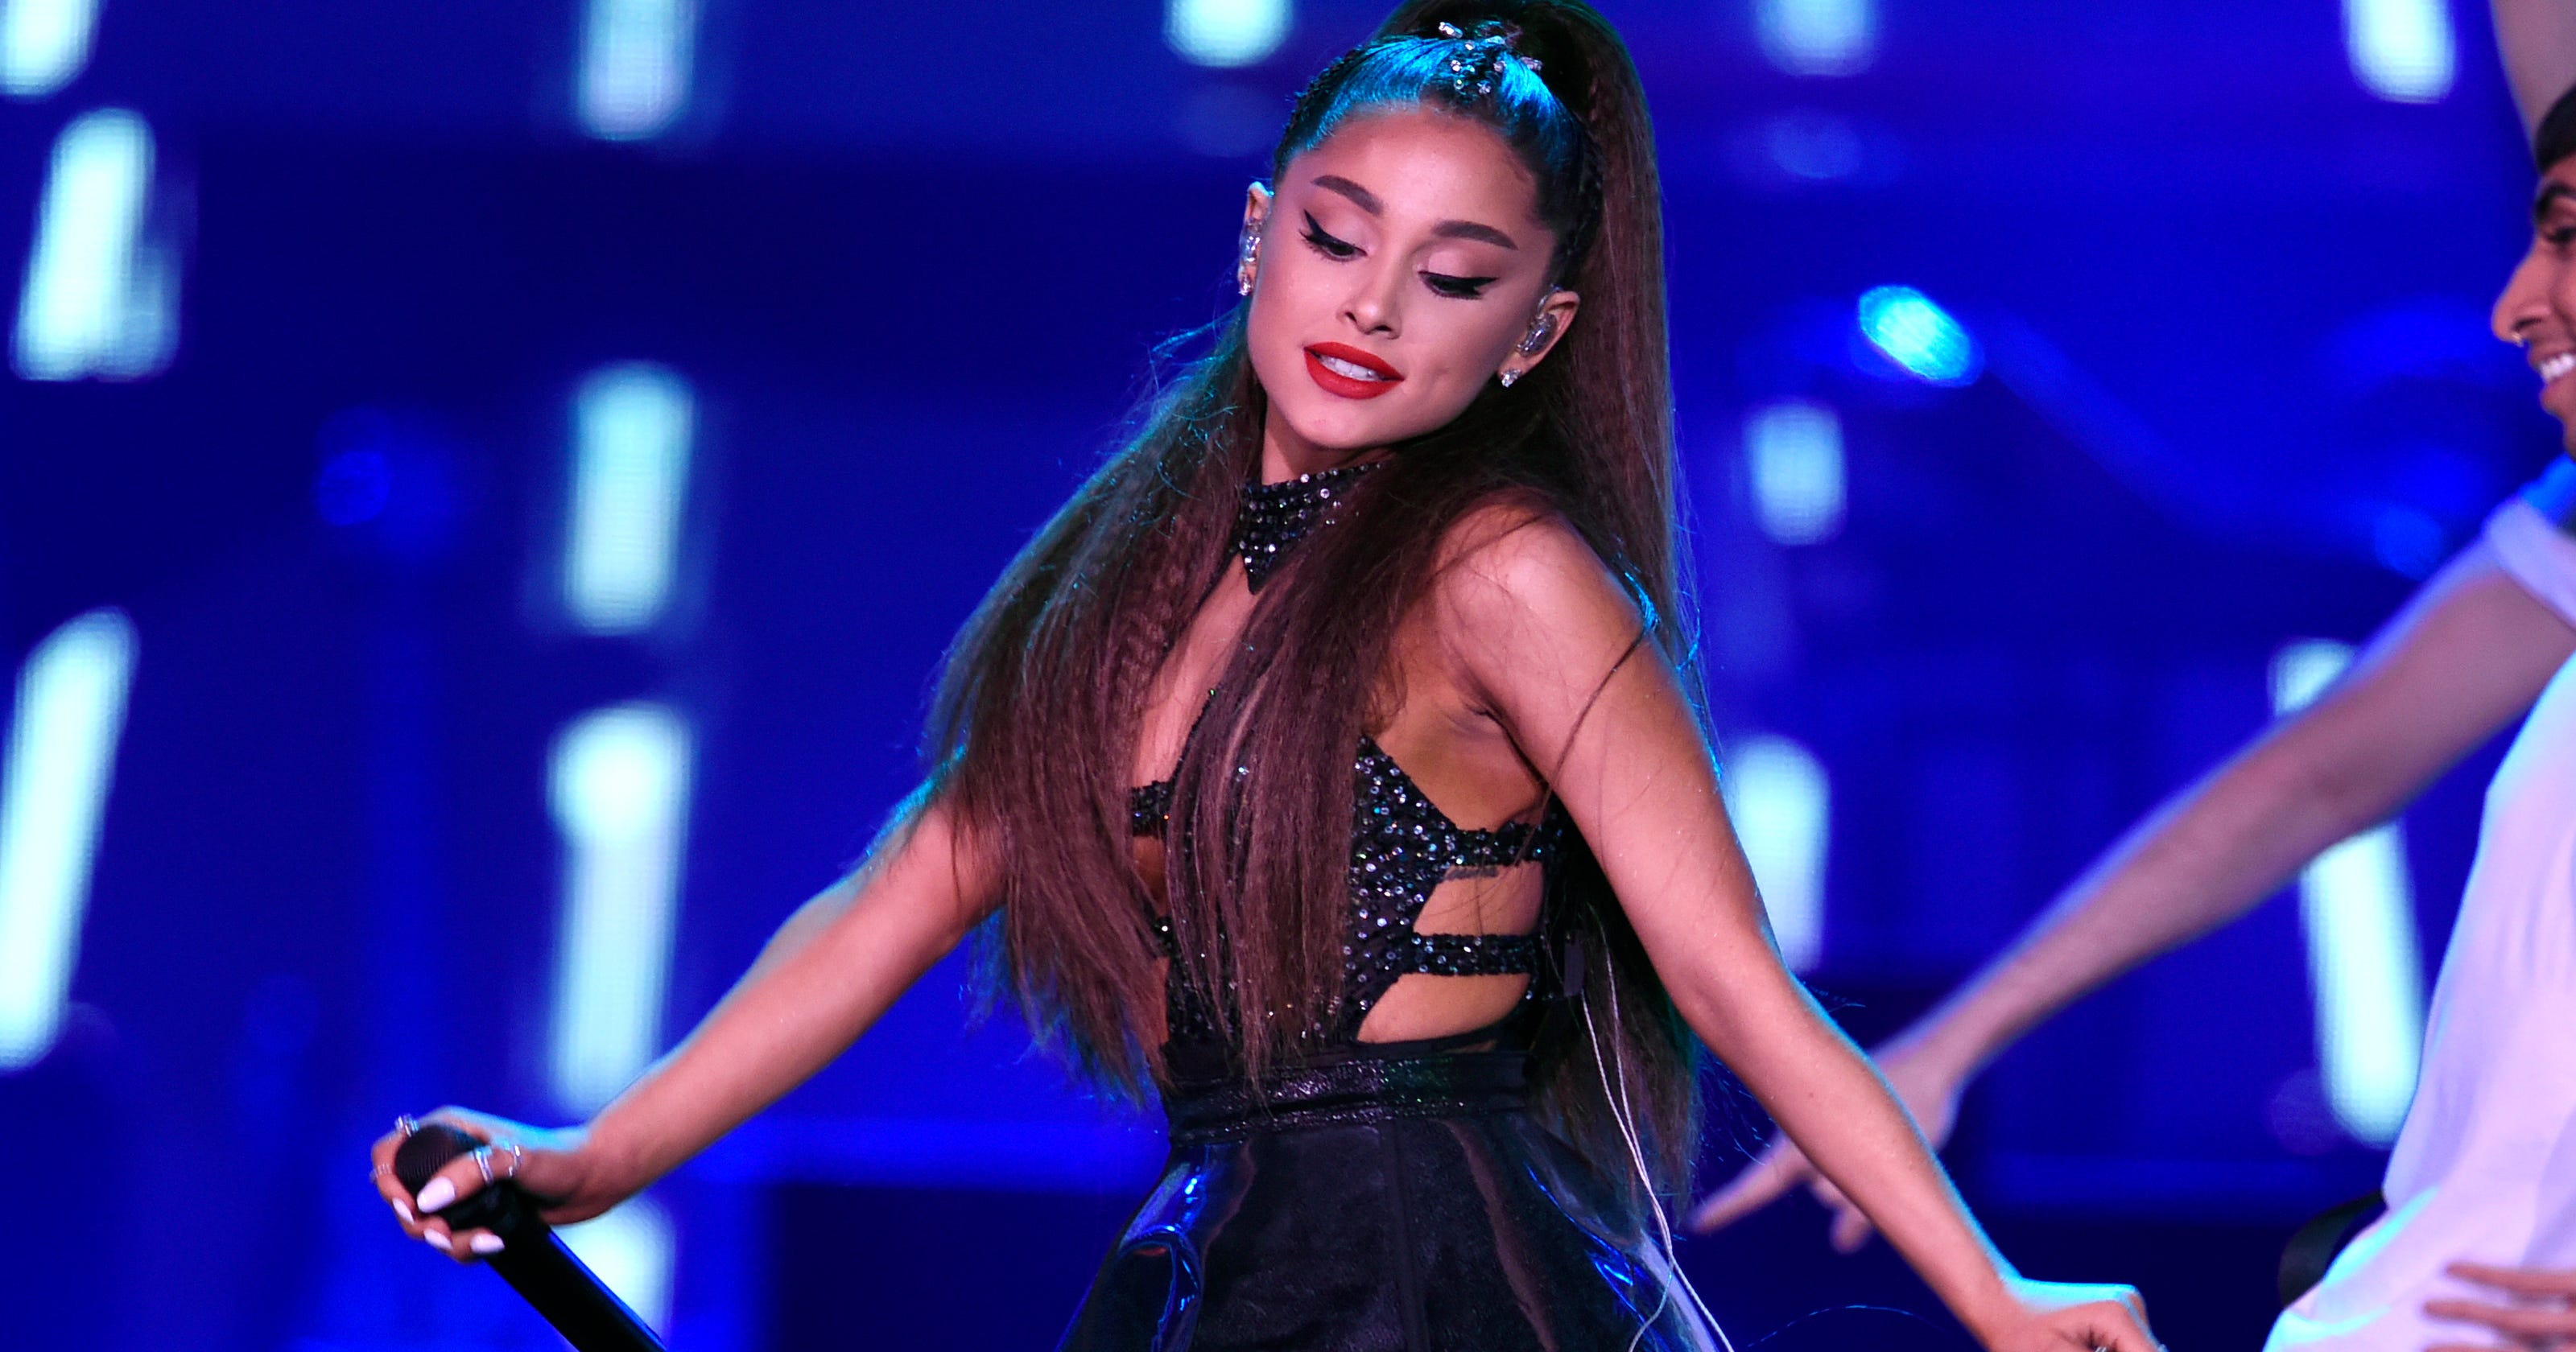 Ariana Grande bisexual?' That question is problematic to ...